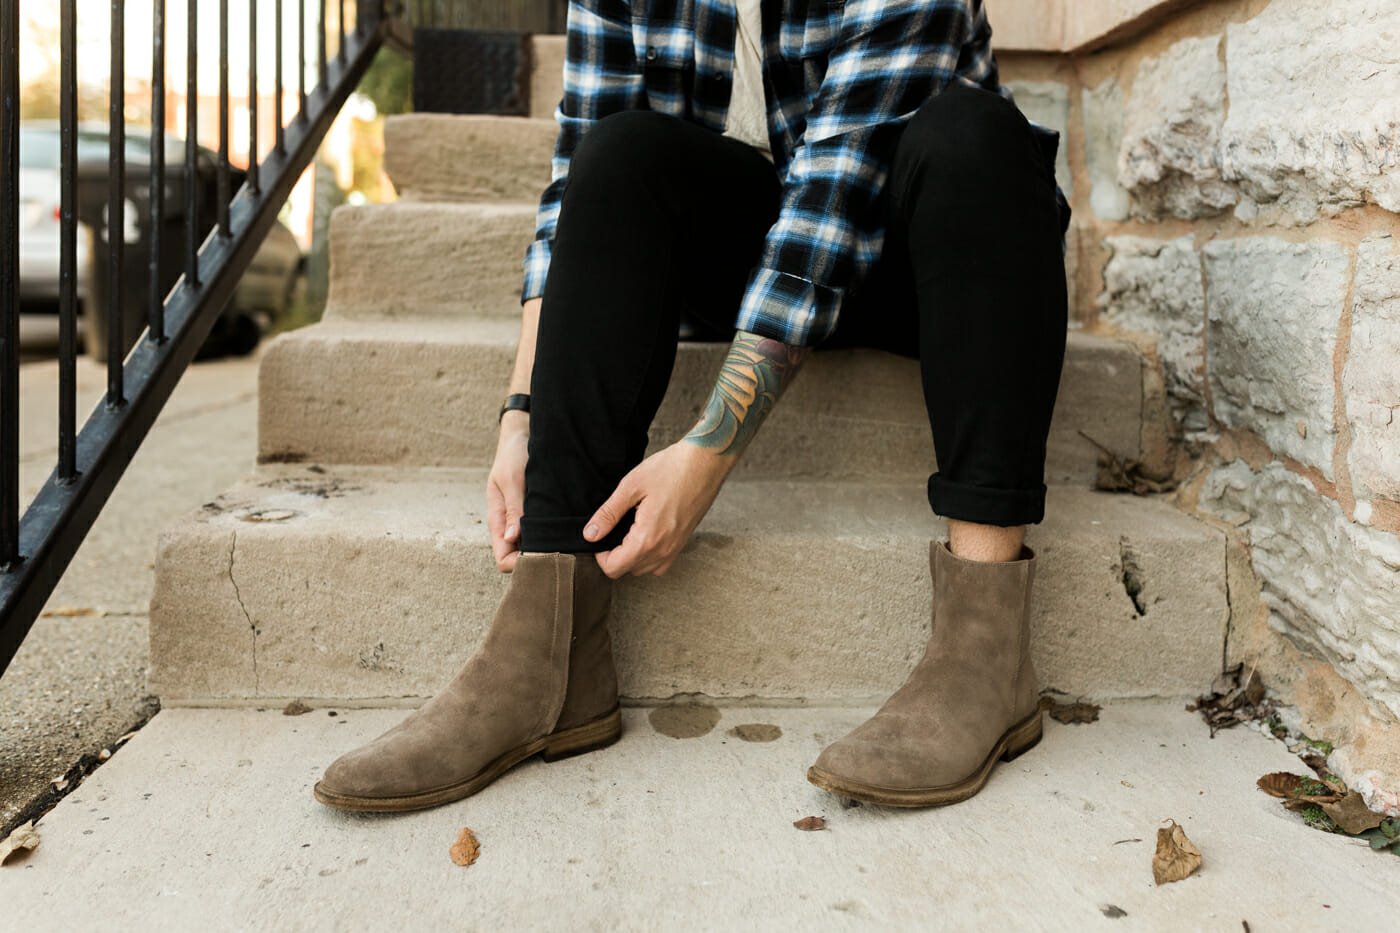 Frye Side Zip Boots with Black Jeans and Plaid Shirt